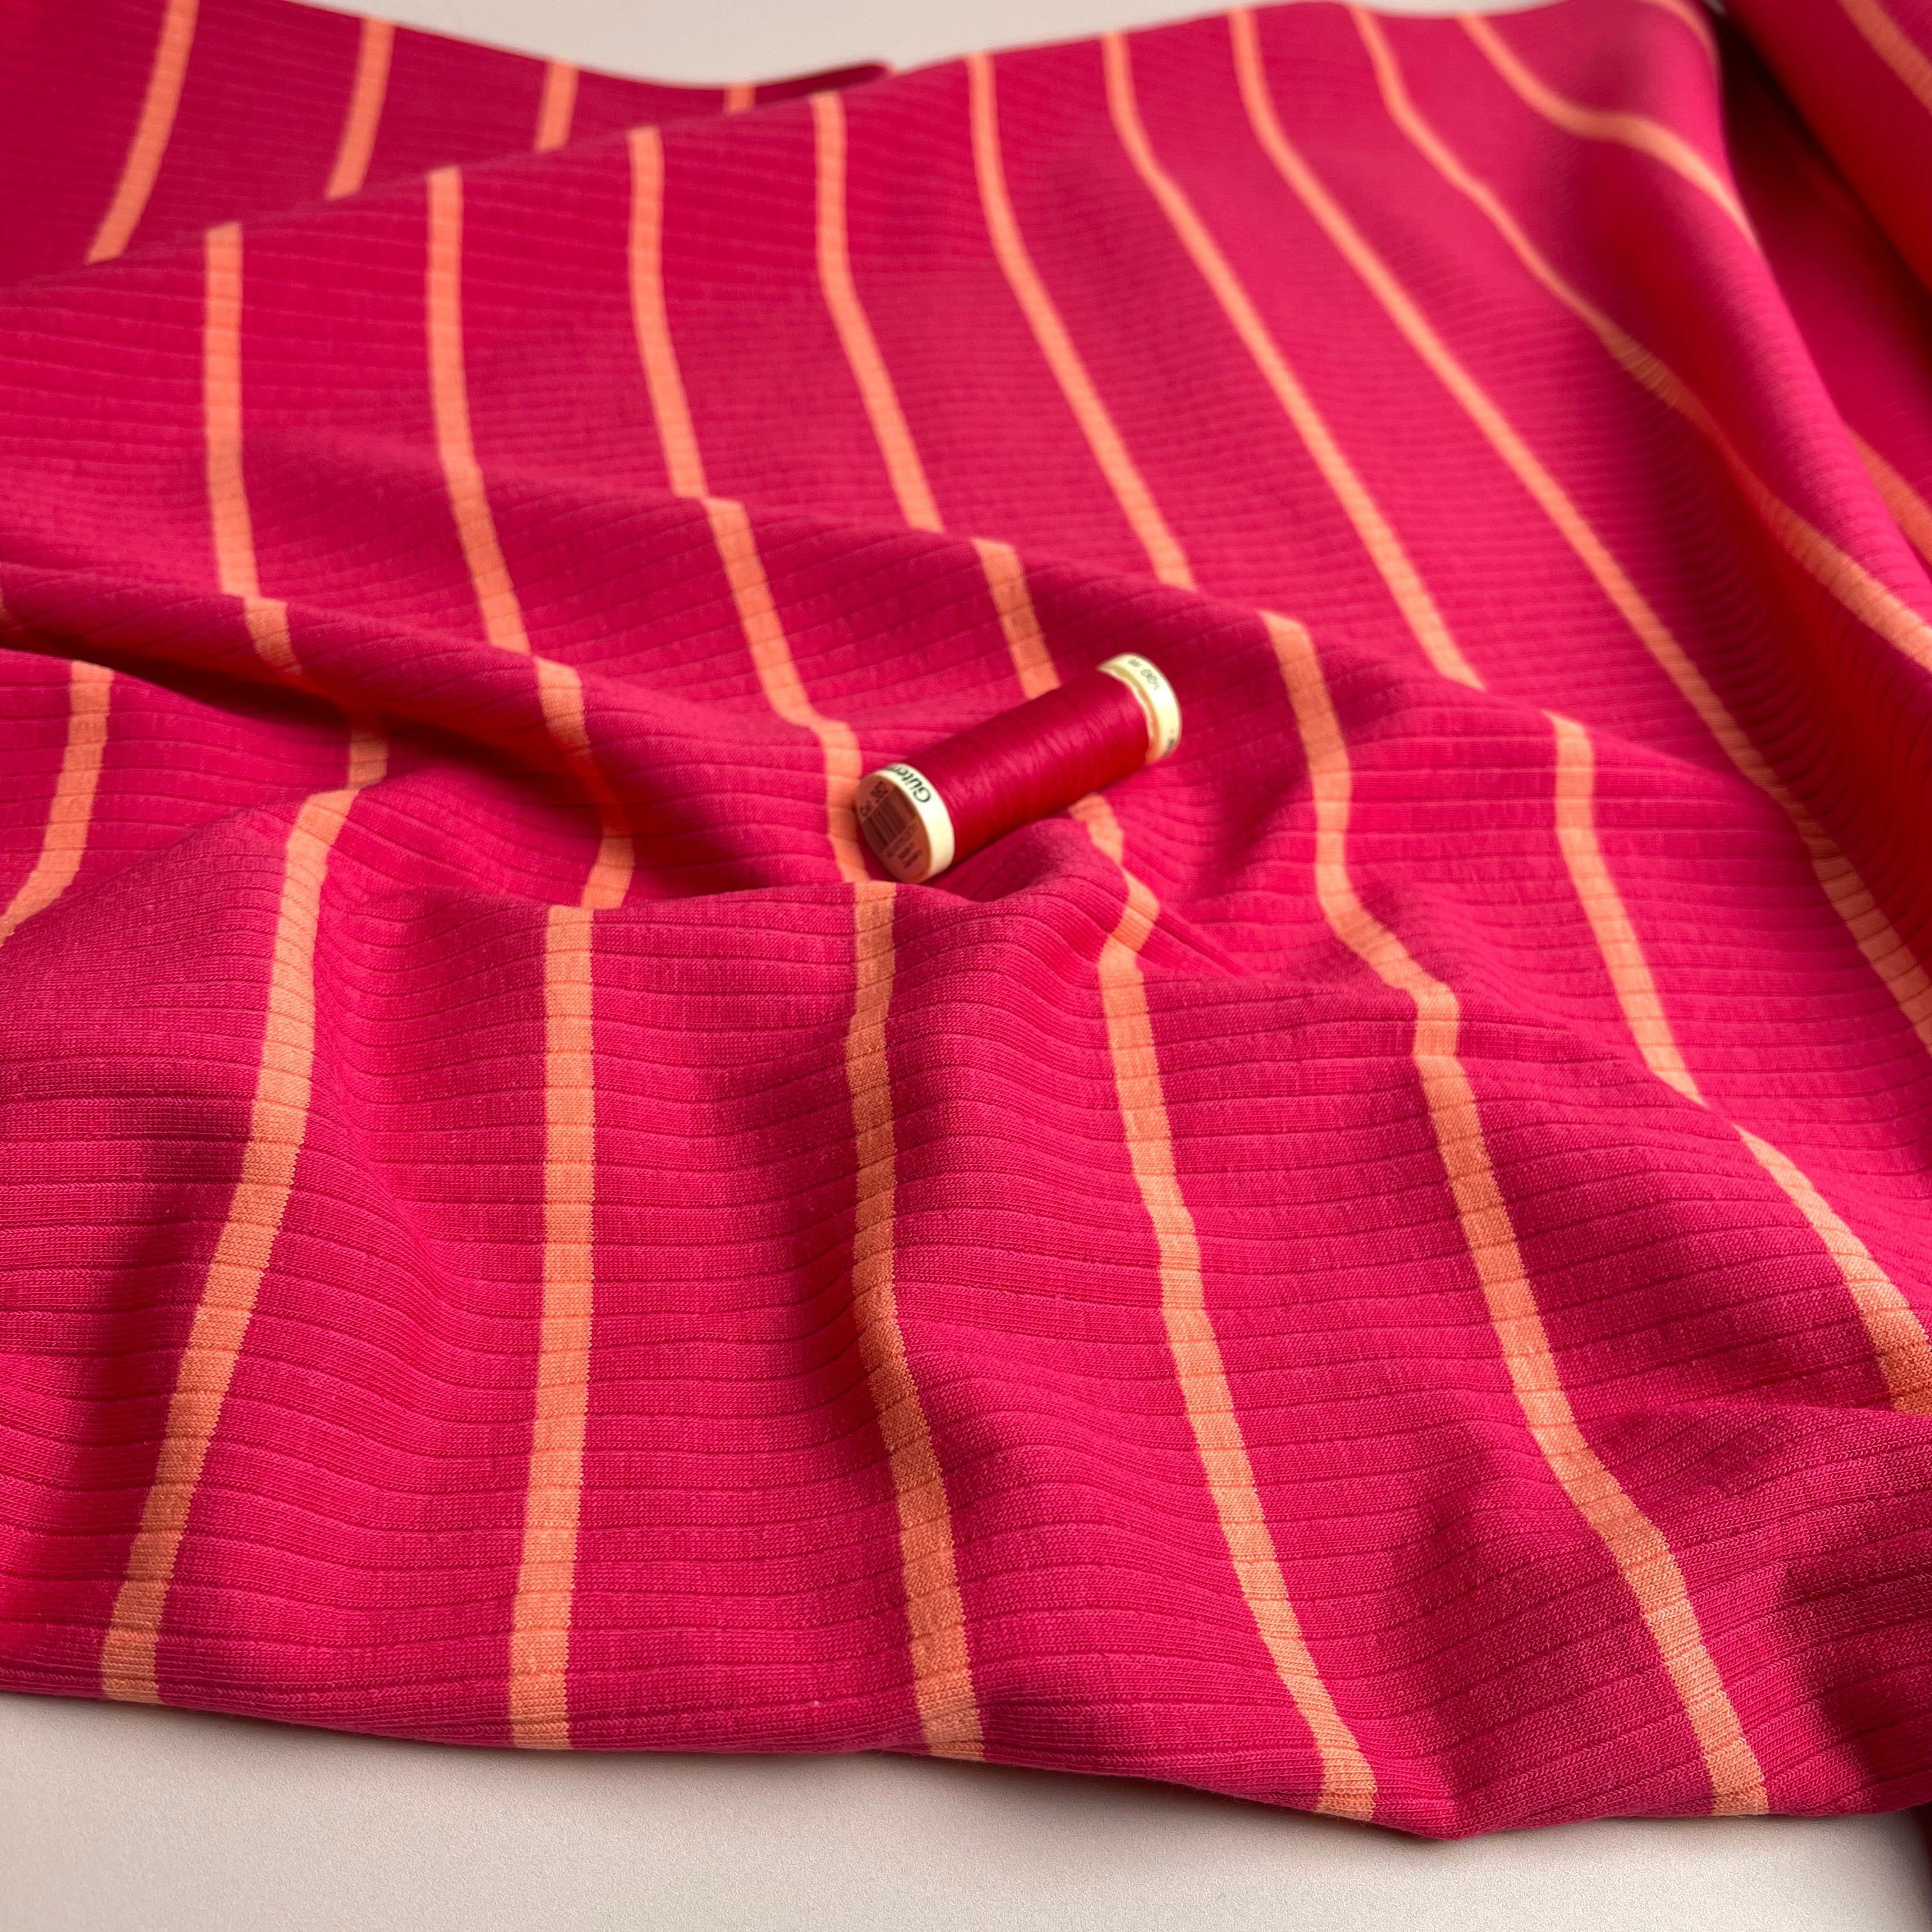 REMNANT 0.4 Metre - Yarn Dyed Striped Cotton Ribbed Jersey in Red & Coral.